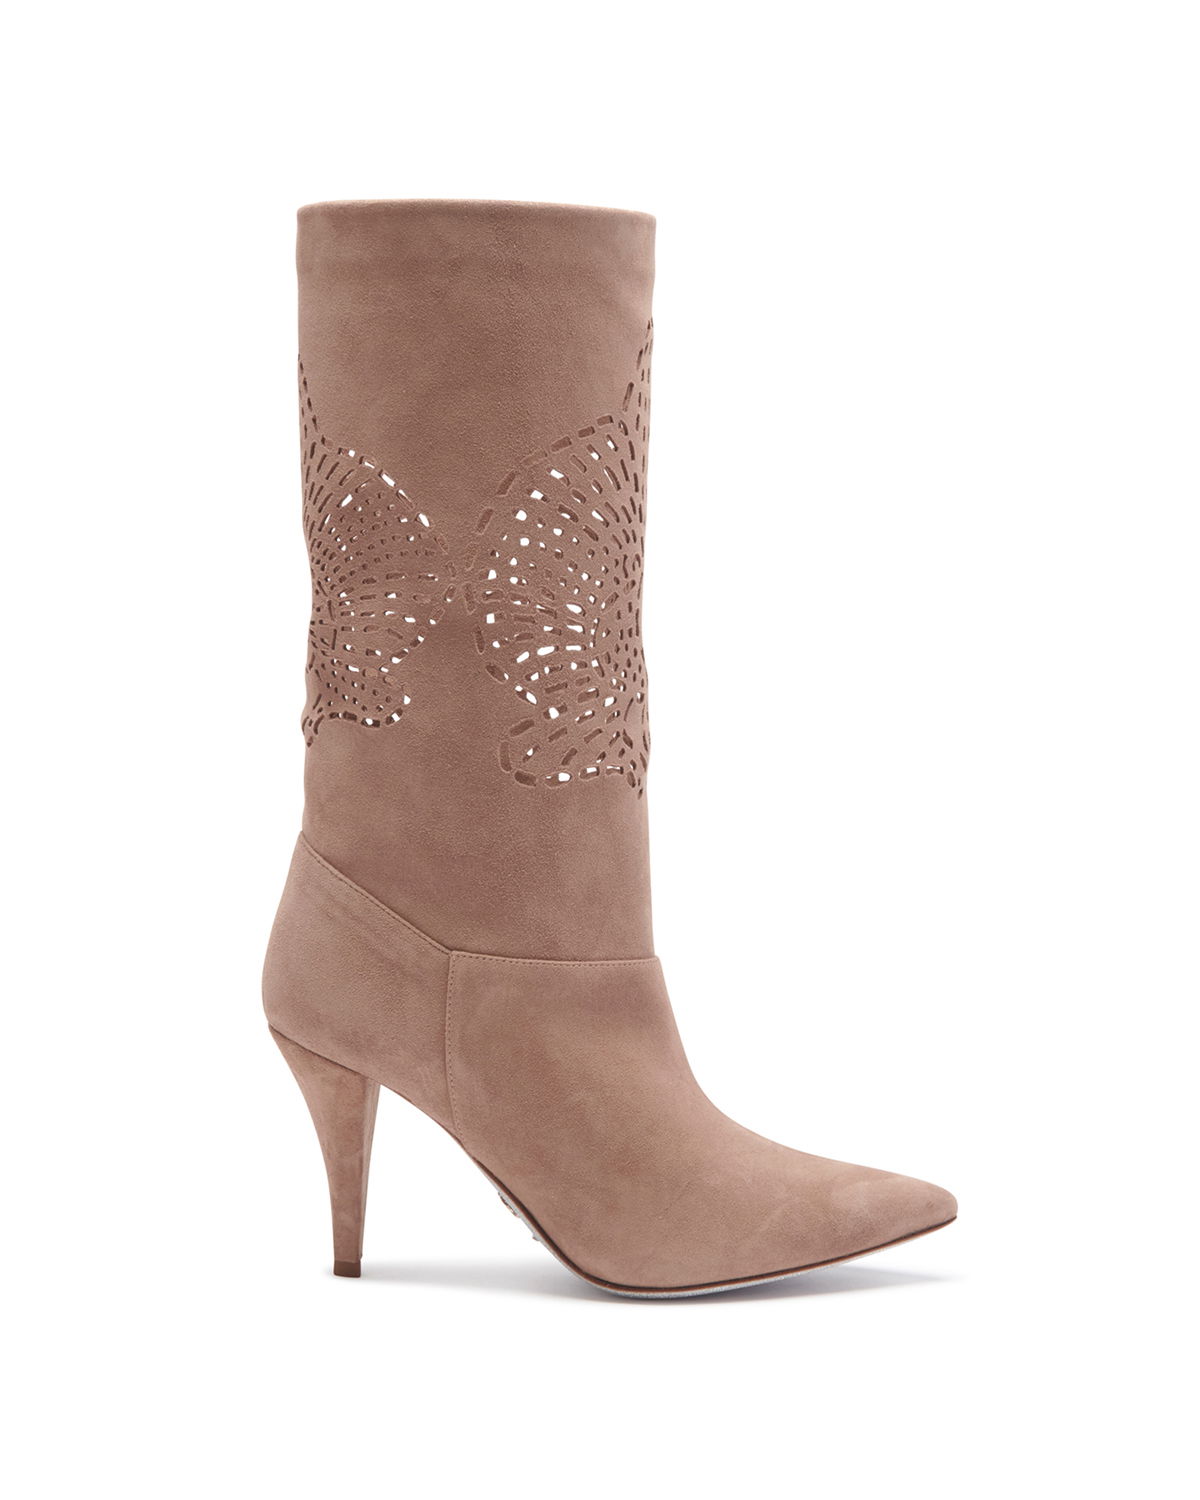 Beige suede boots | Temporary Flash Sale | Genny